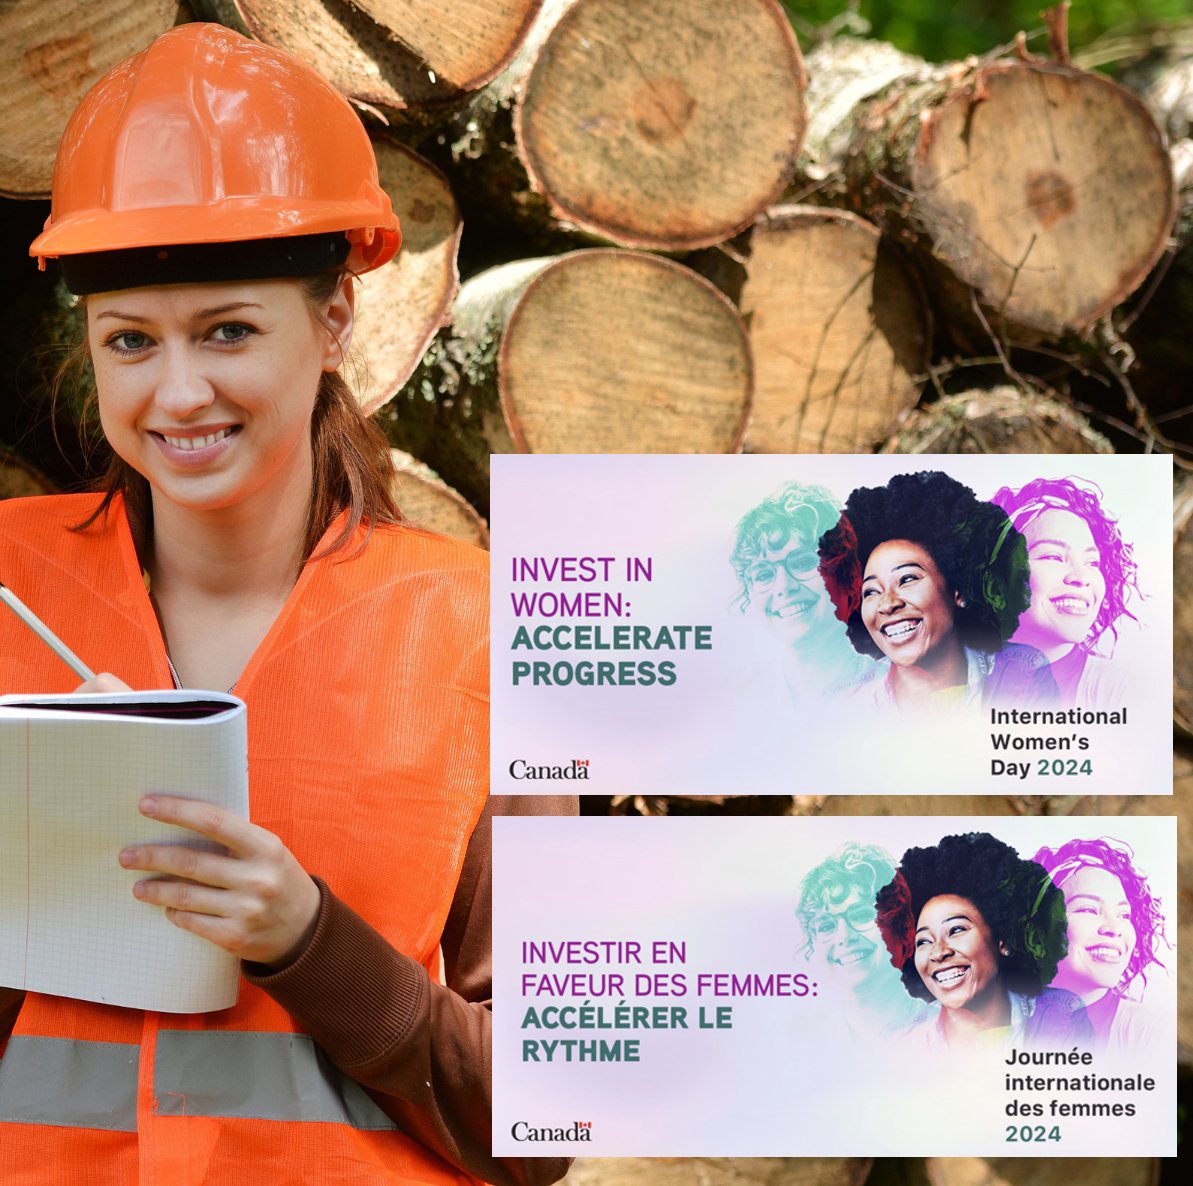 Happy International Women's Day! Celebrate the incredible achievements of women in forestry and highlight the ongoing journey towards a more inclusive industry. #InternationalWomensDay #InclusiveForestry #DiversityMatters #EmpowerEveryVoice #ForestryFuture